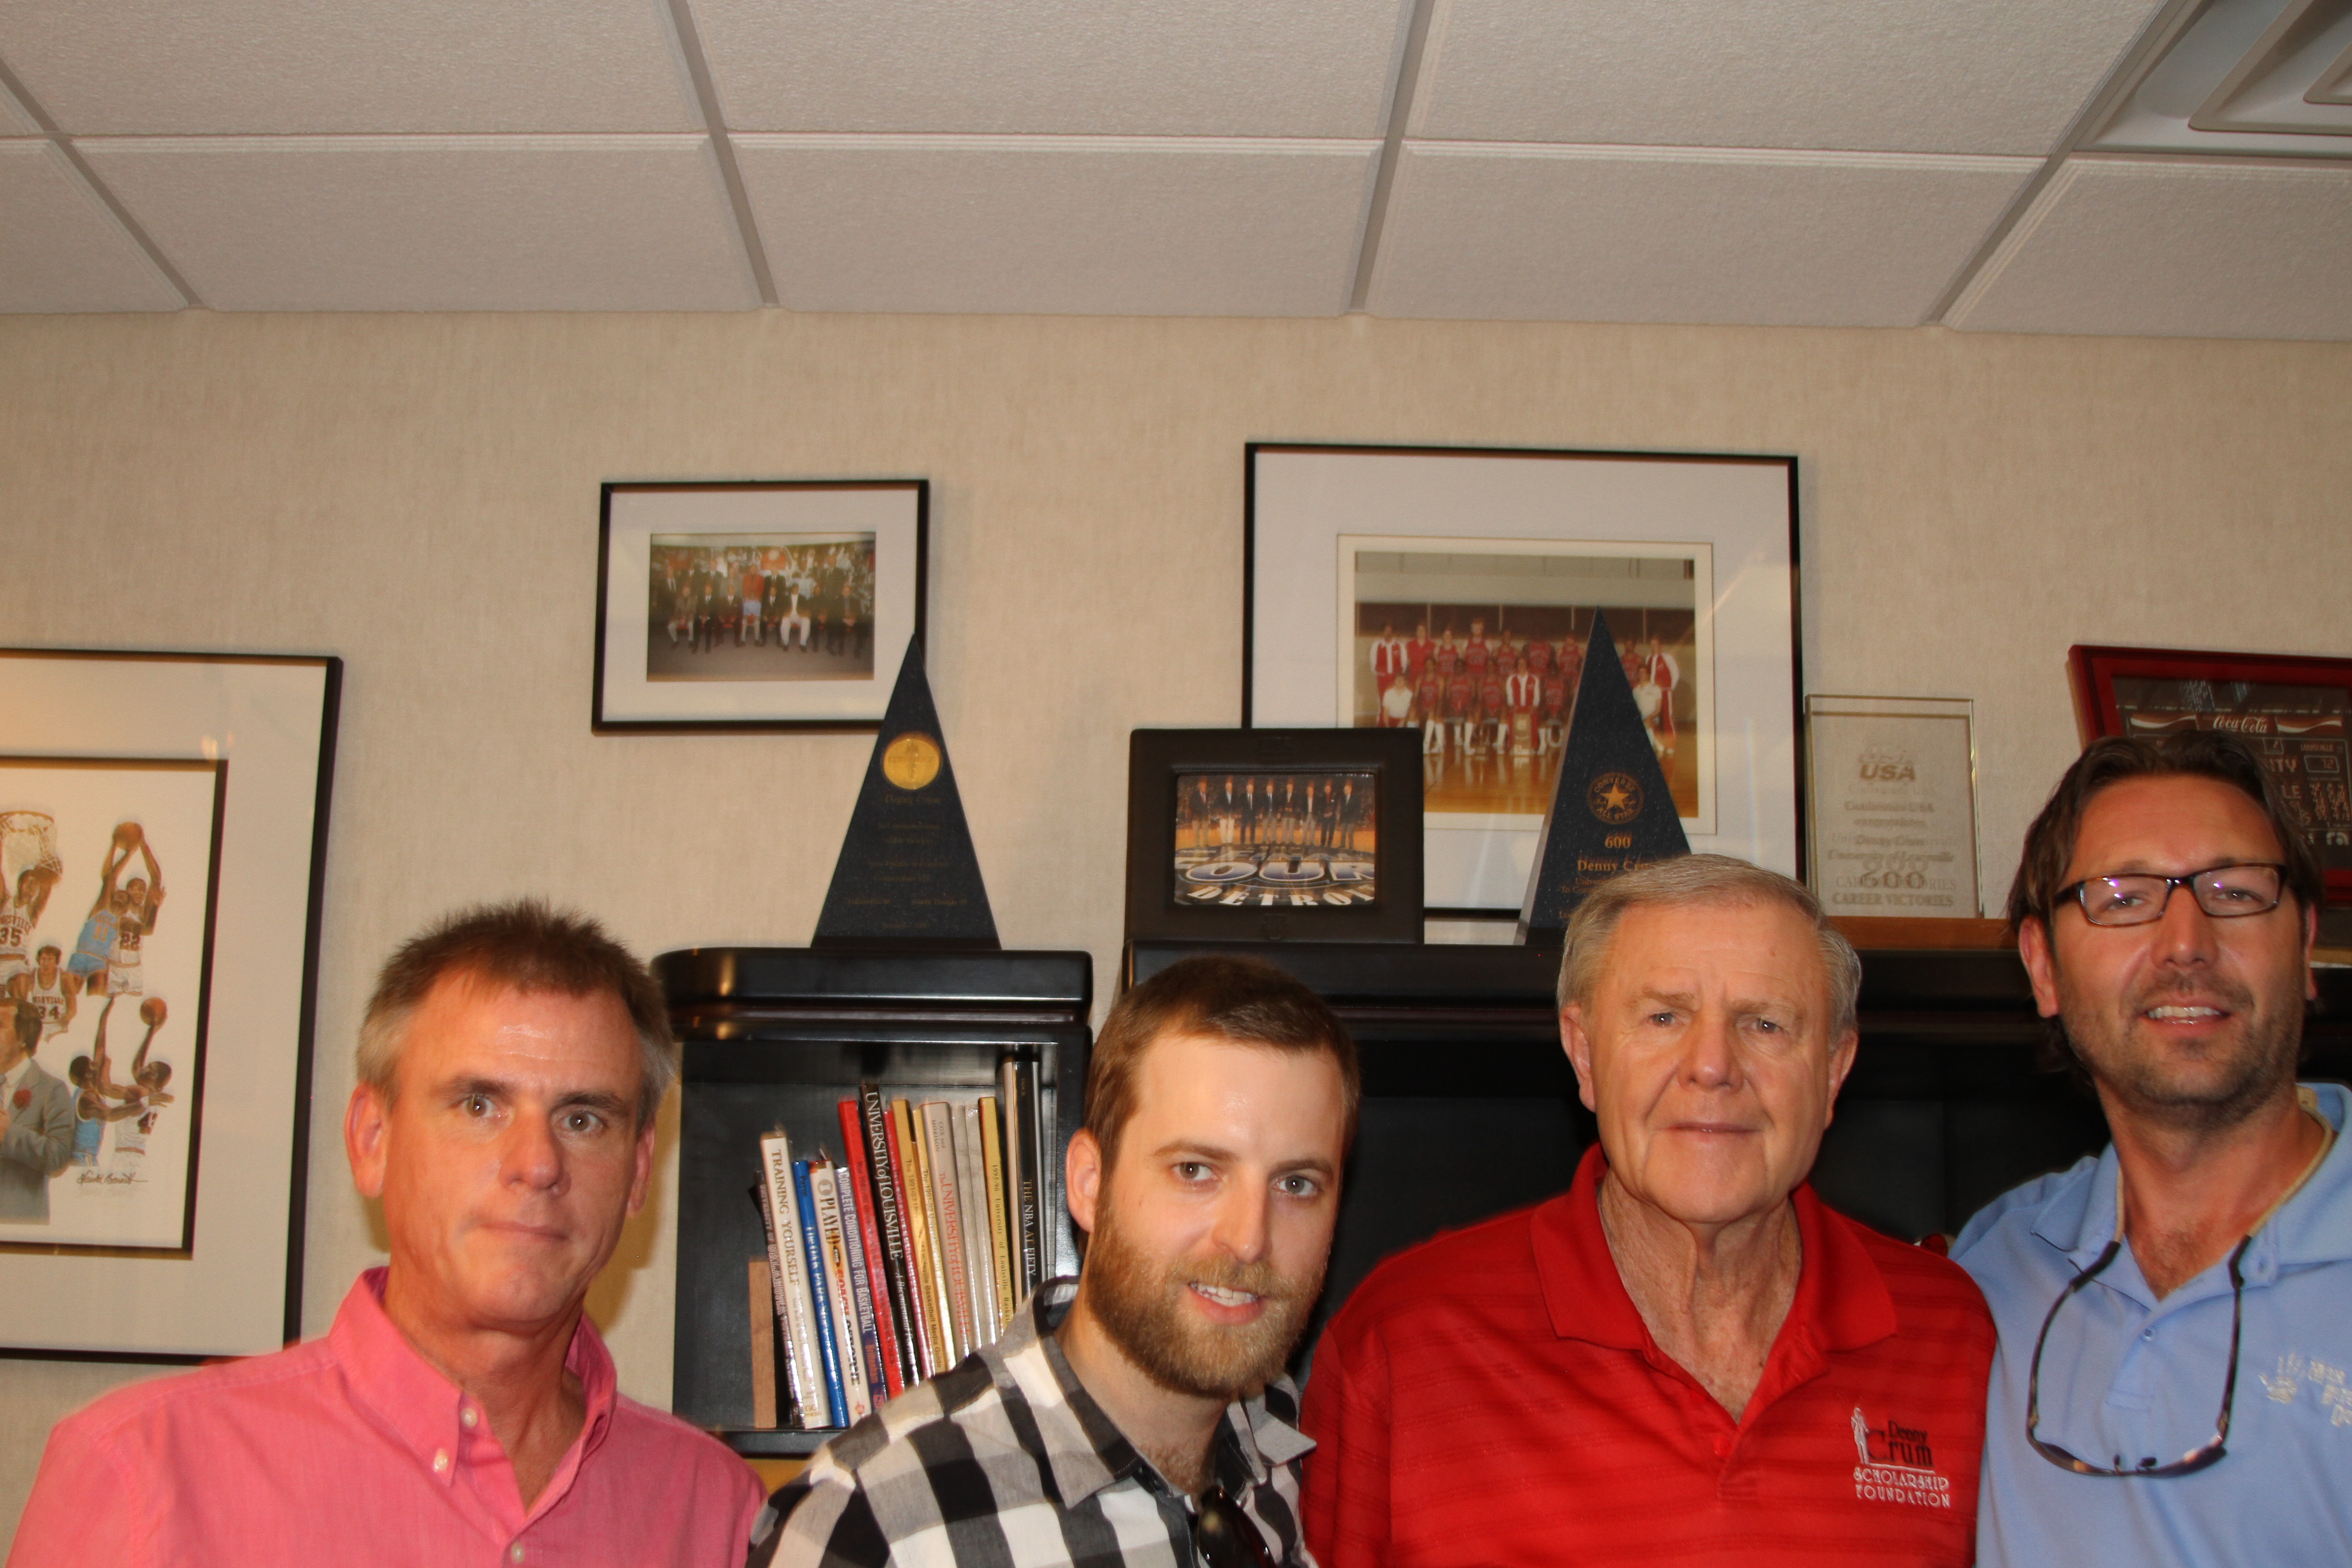 Filming Red v Blue in legendary Coach Denny Crum's office in Louisville, Kentucky